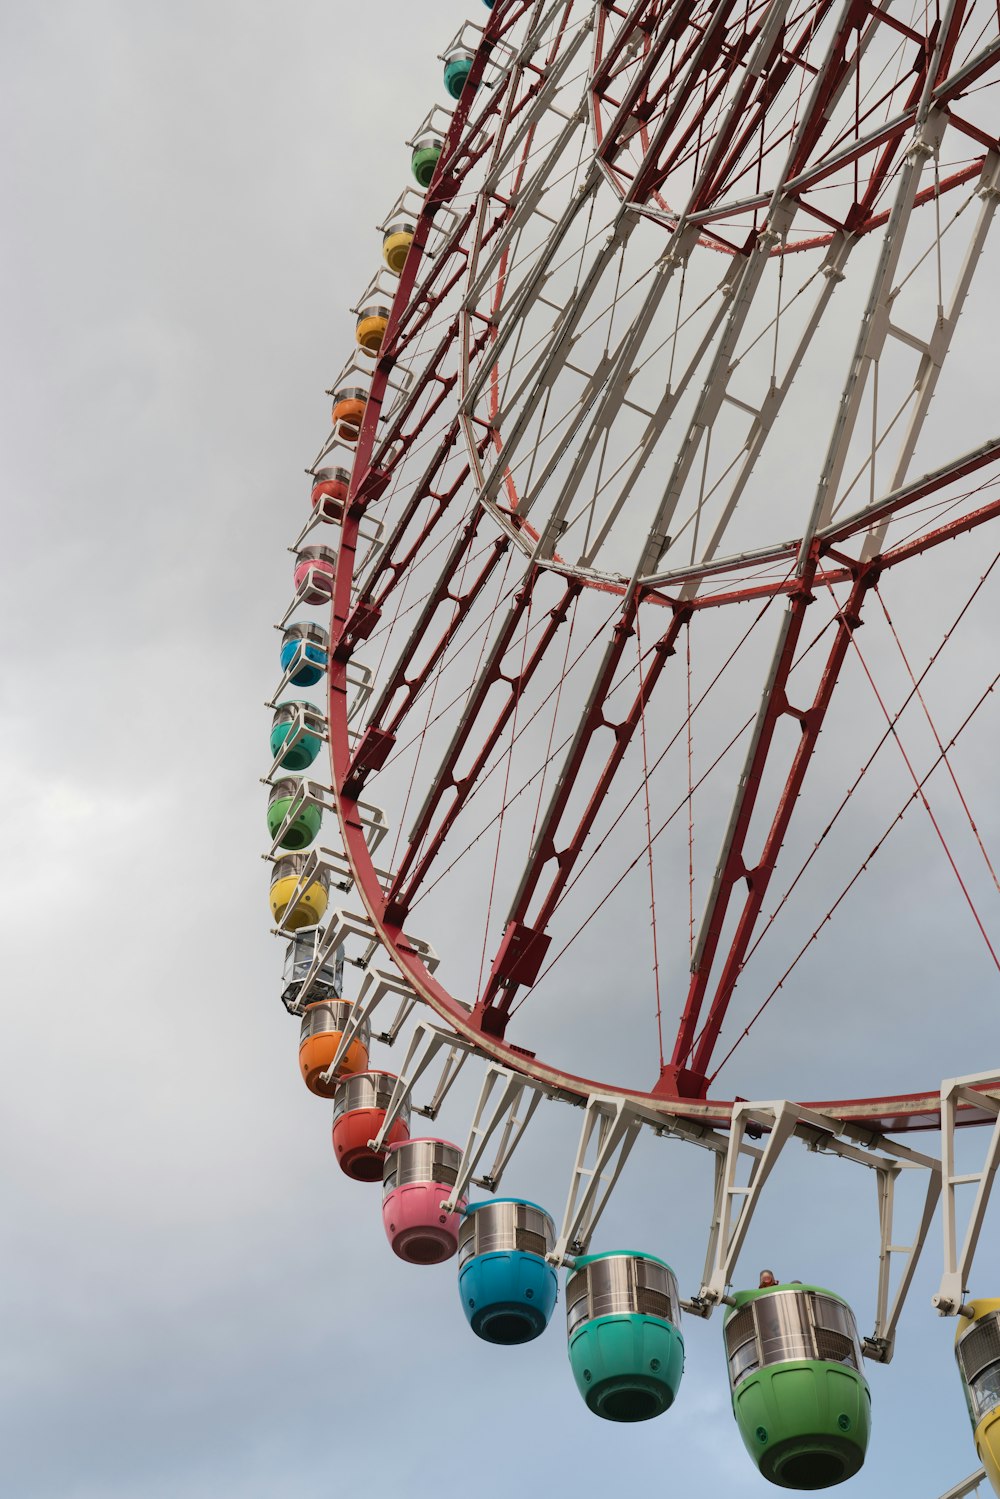 low-angle photography of a Ferris Wheel under cloudy sky